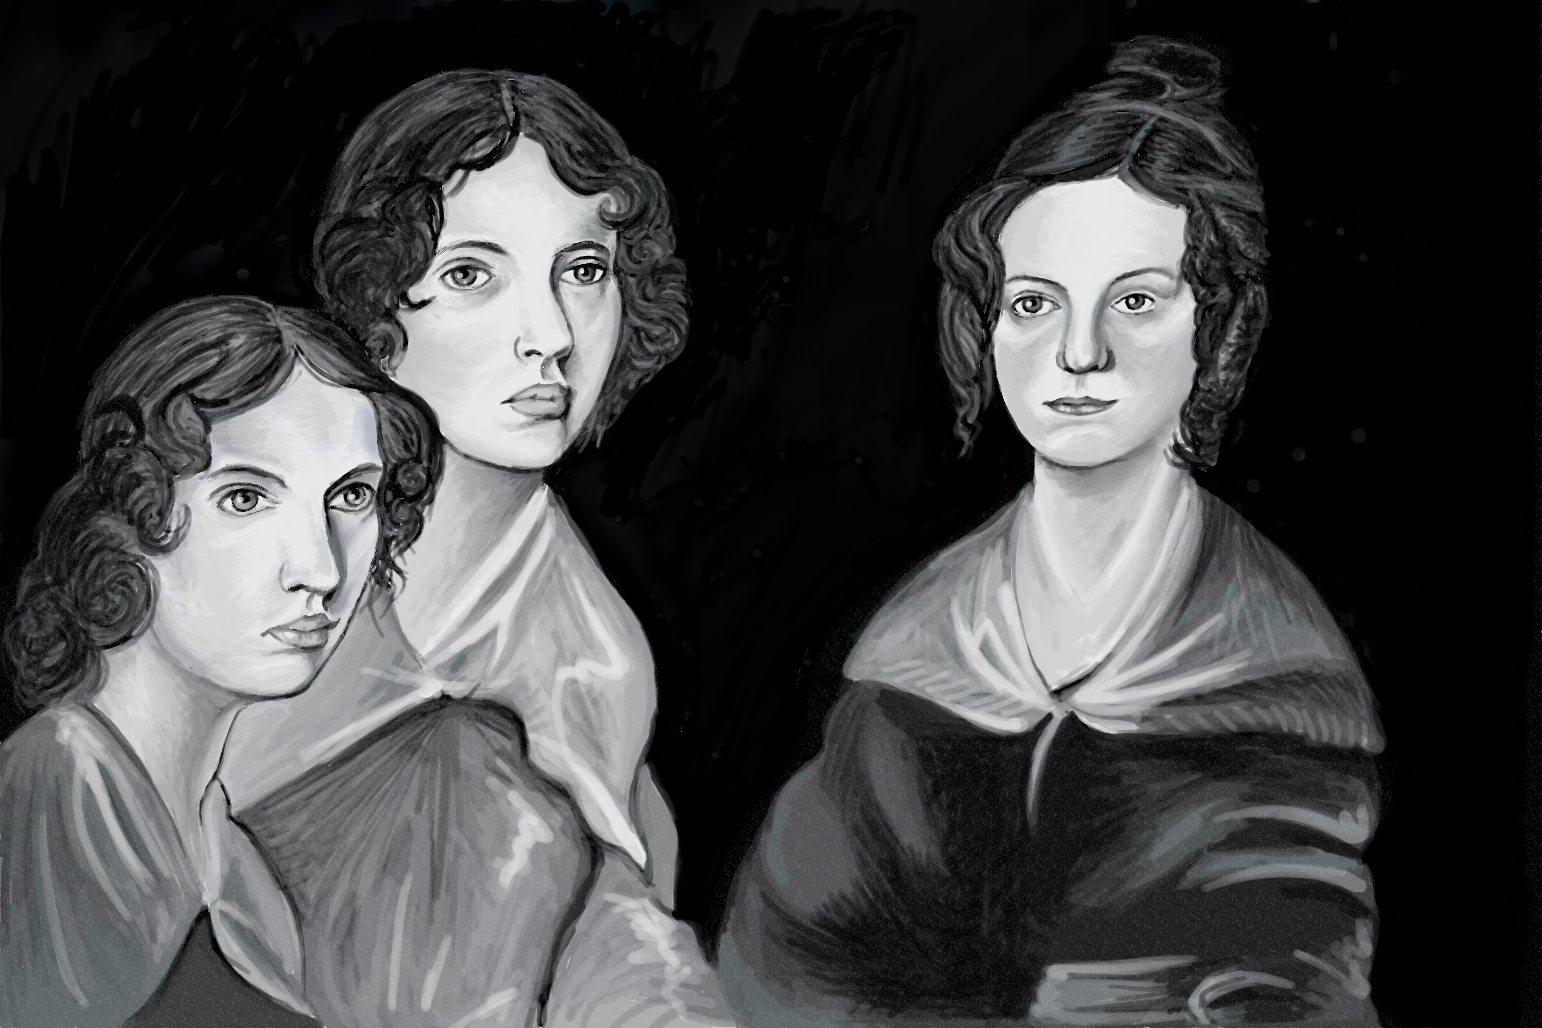 The Bronte Sisters recreated by James Mylne on the Surface Pro 3 using a pen